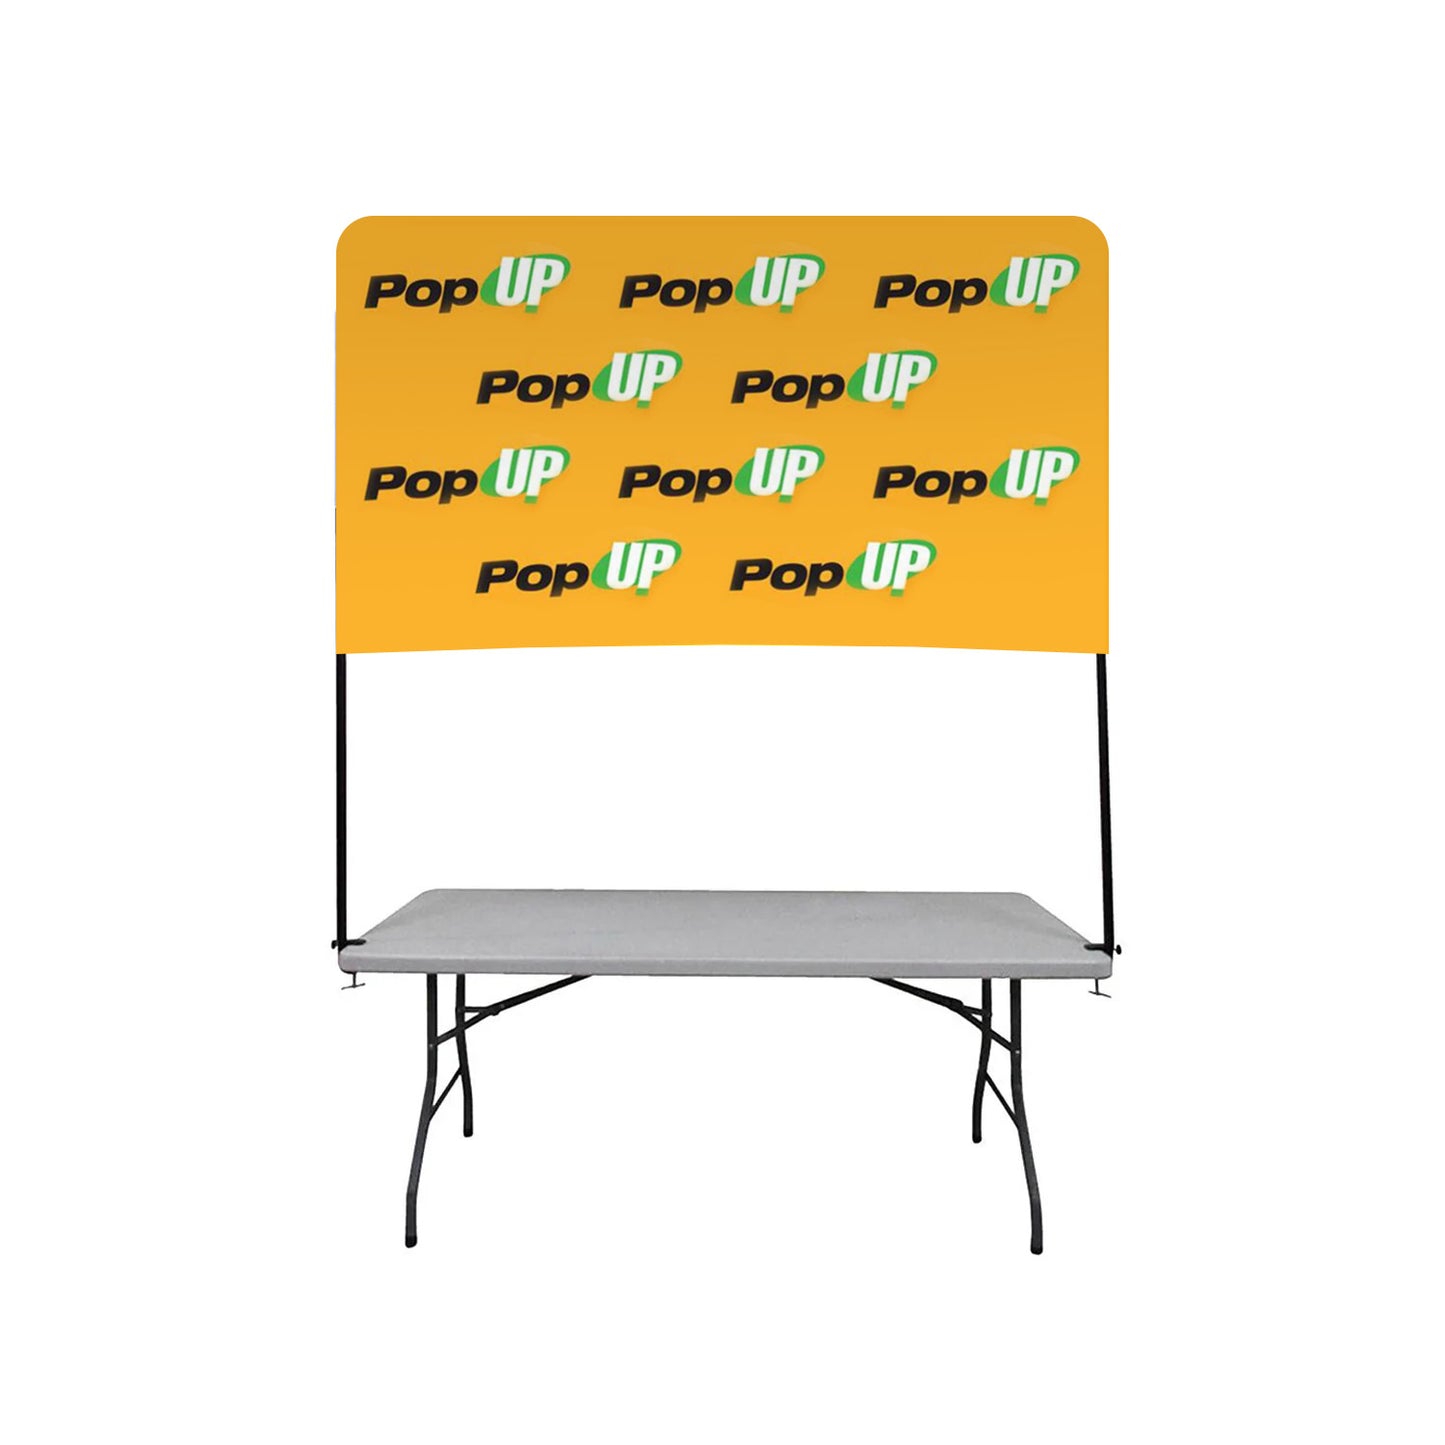 OVERHEAD BANNER DISPLAY FOR 6' TABLE